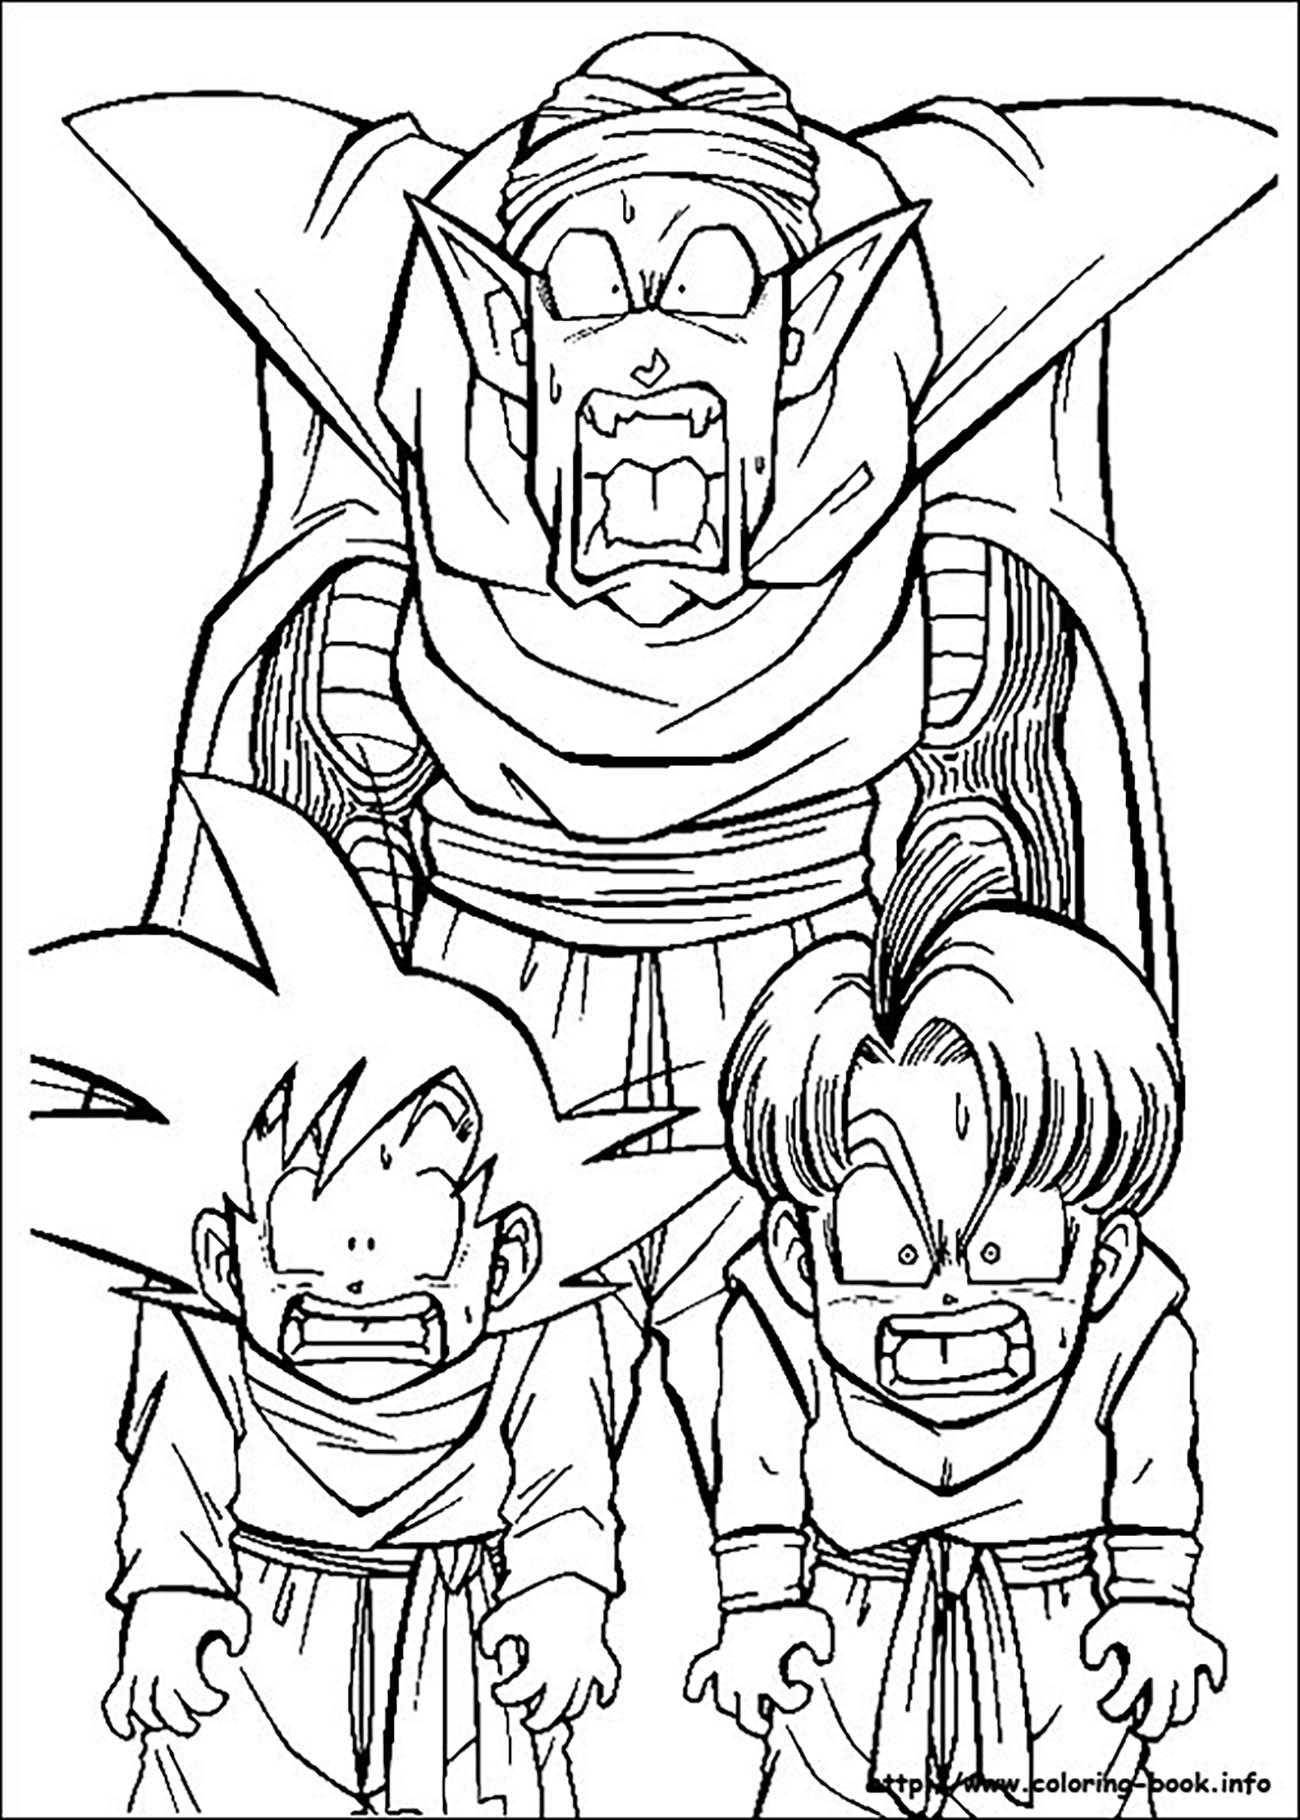 100 Exciting Dragon Ball Z Coloring Ideas 46